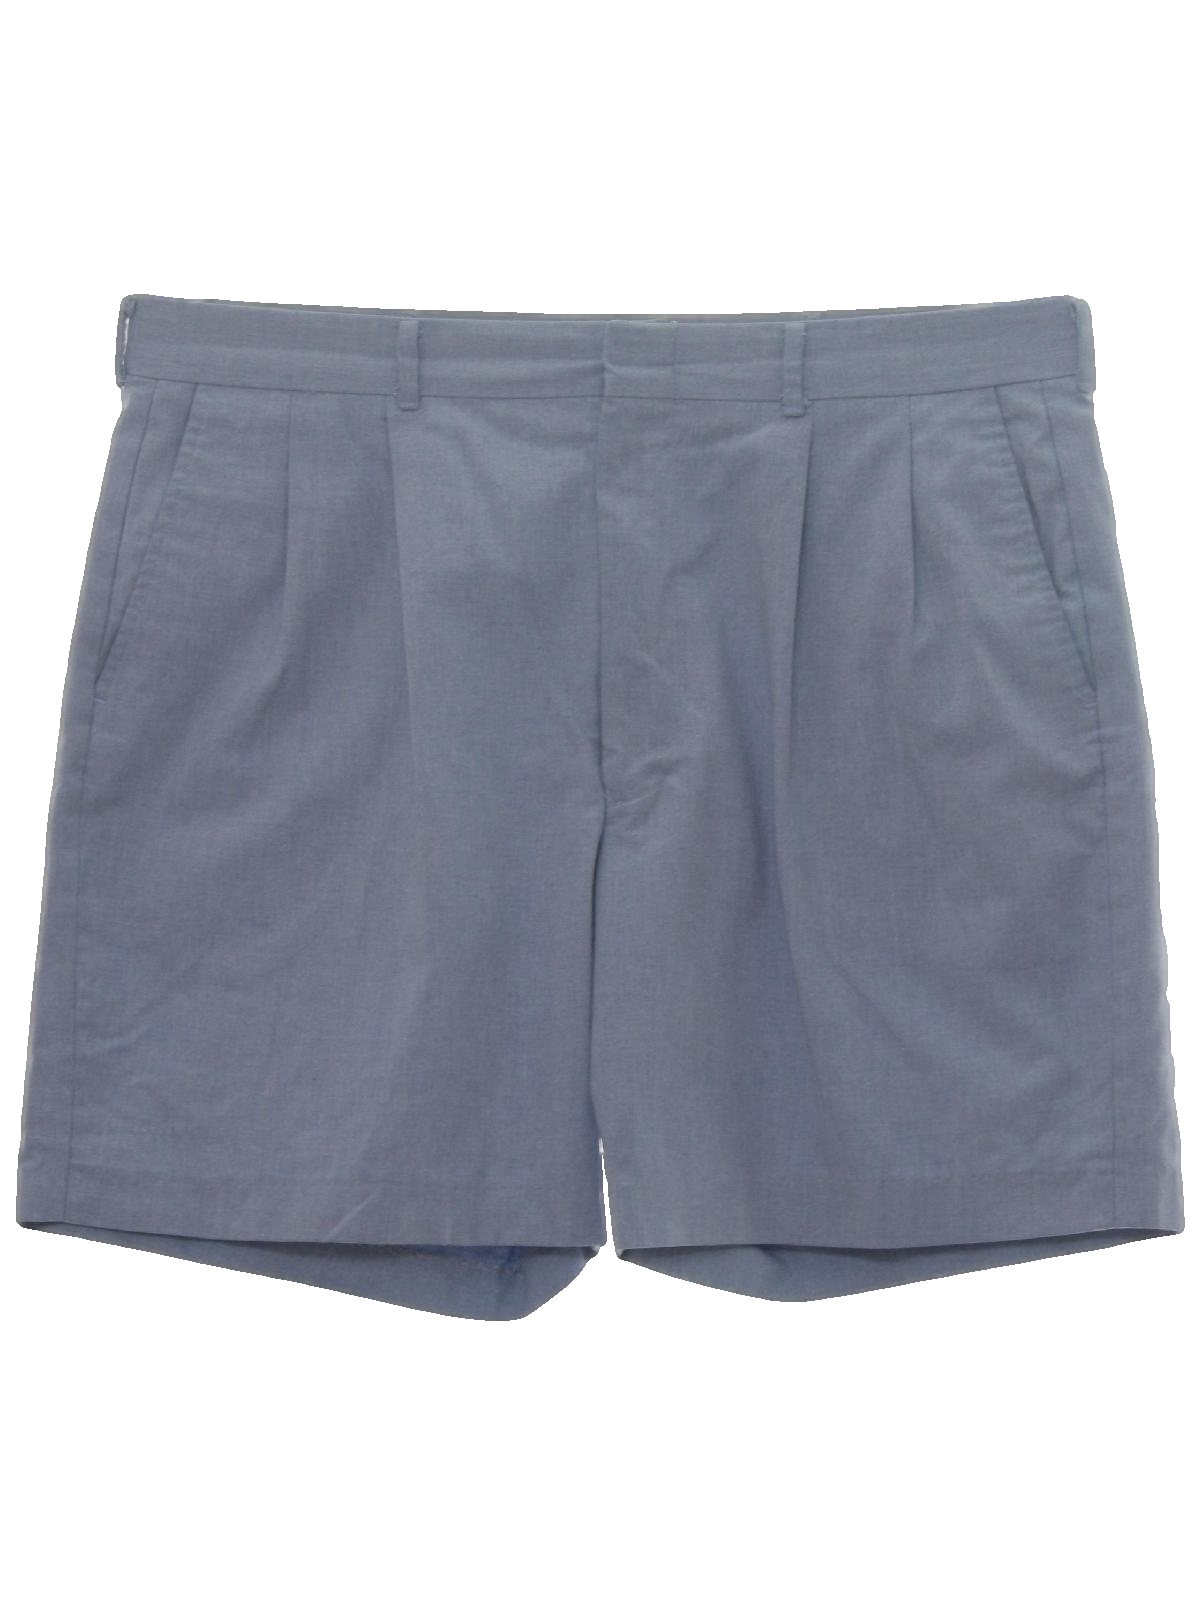 80s Retro Shorts: 80s -Missing Label- Mens heathered baby blue ...